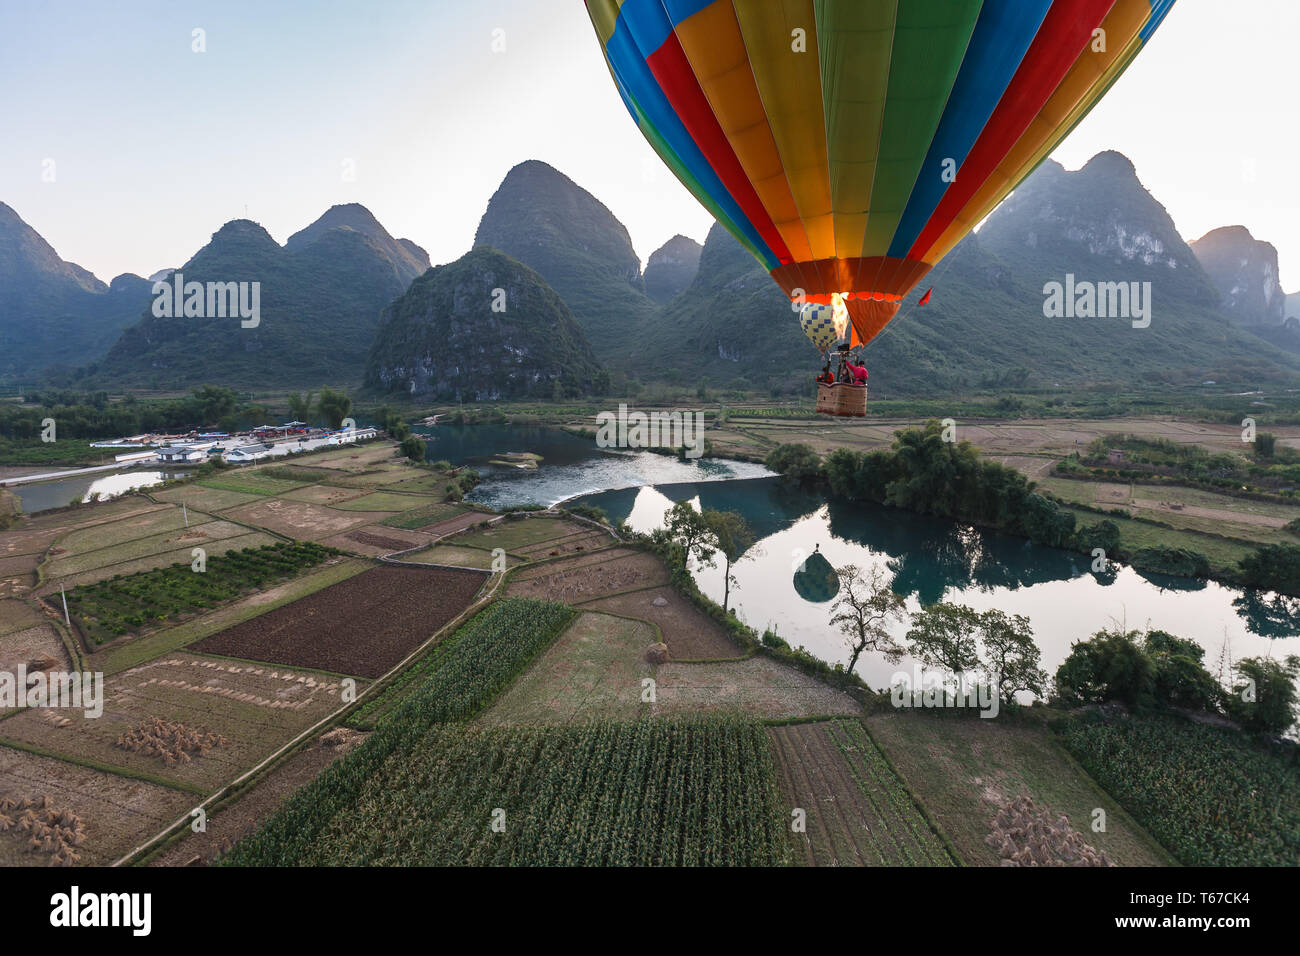 View of hot air balloon basket approaching landing spot in middle of rice fields and high mountains and a river Stock Photo